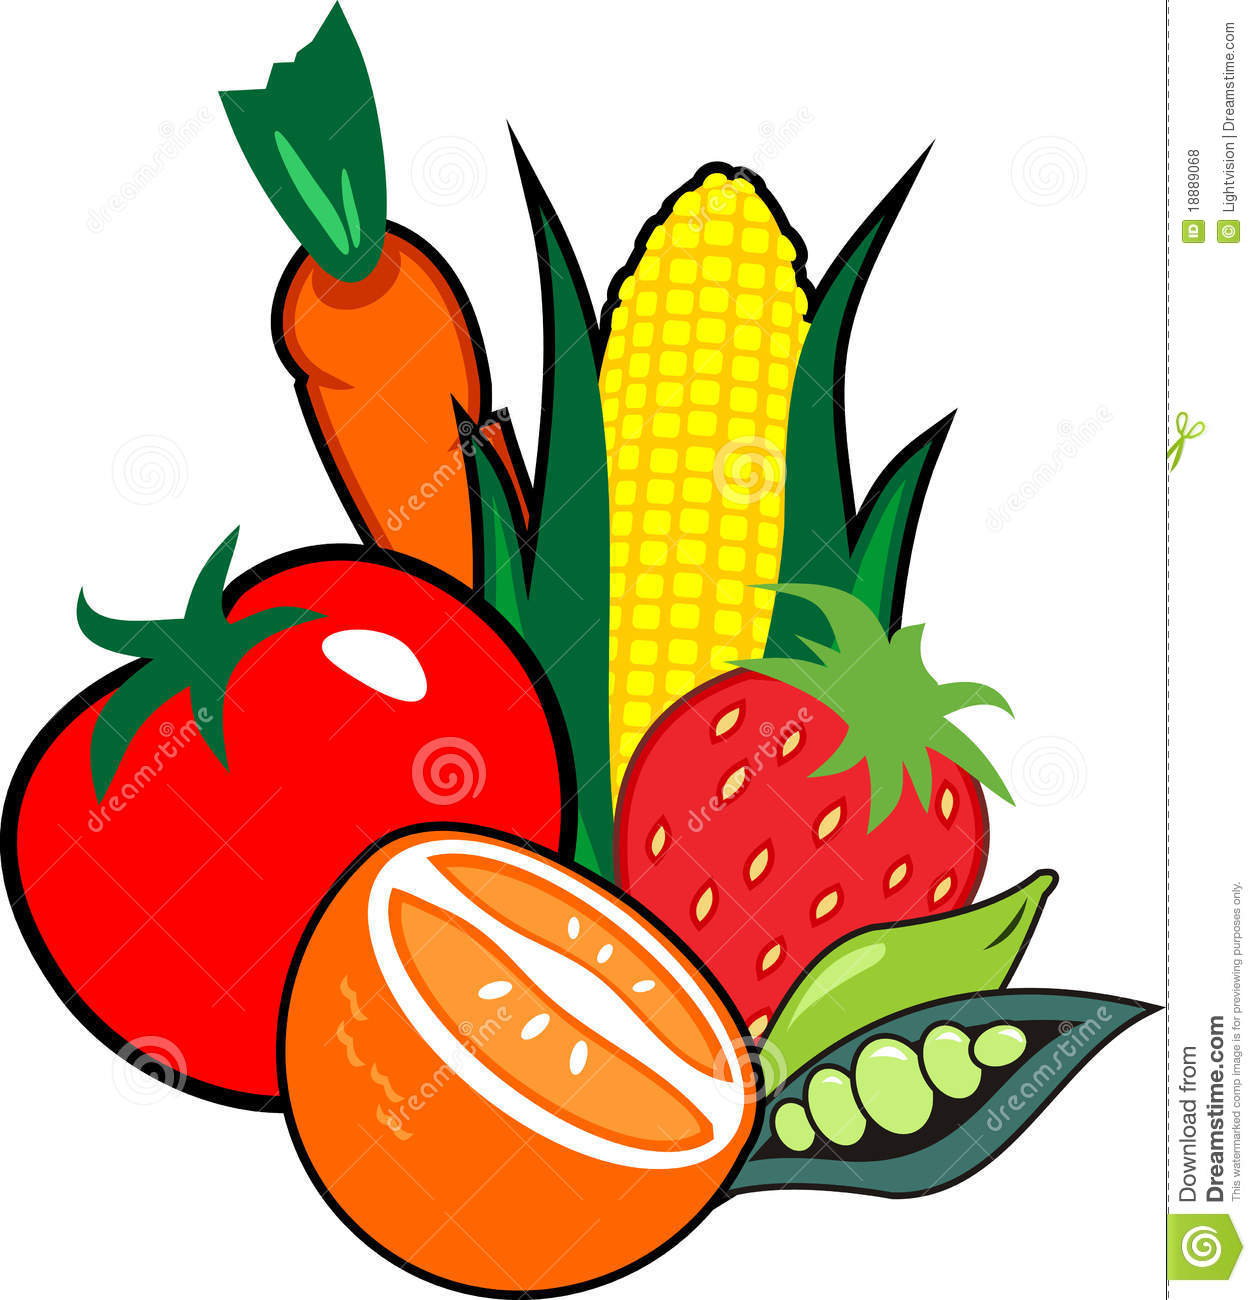 There Is 38 Vegetable Border   Free Cliparts All Used For Free 